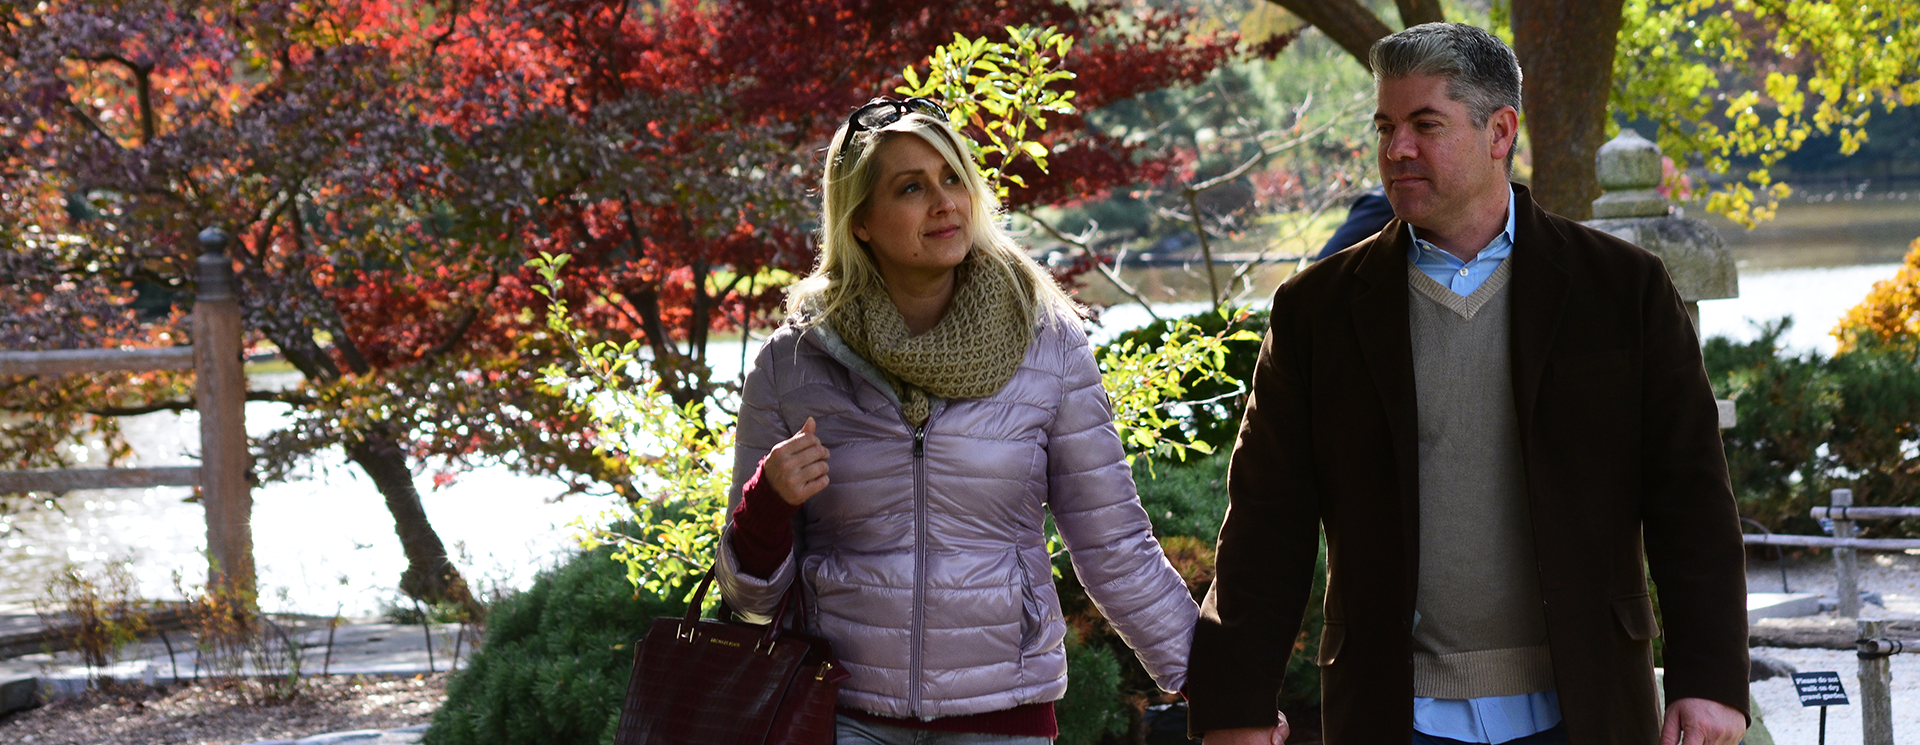 couple walking through the gardens in the fall